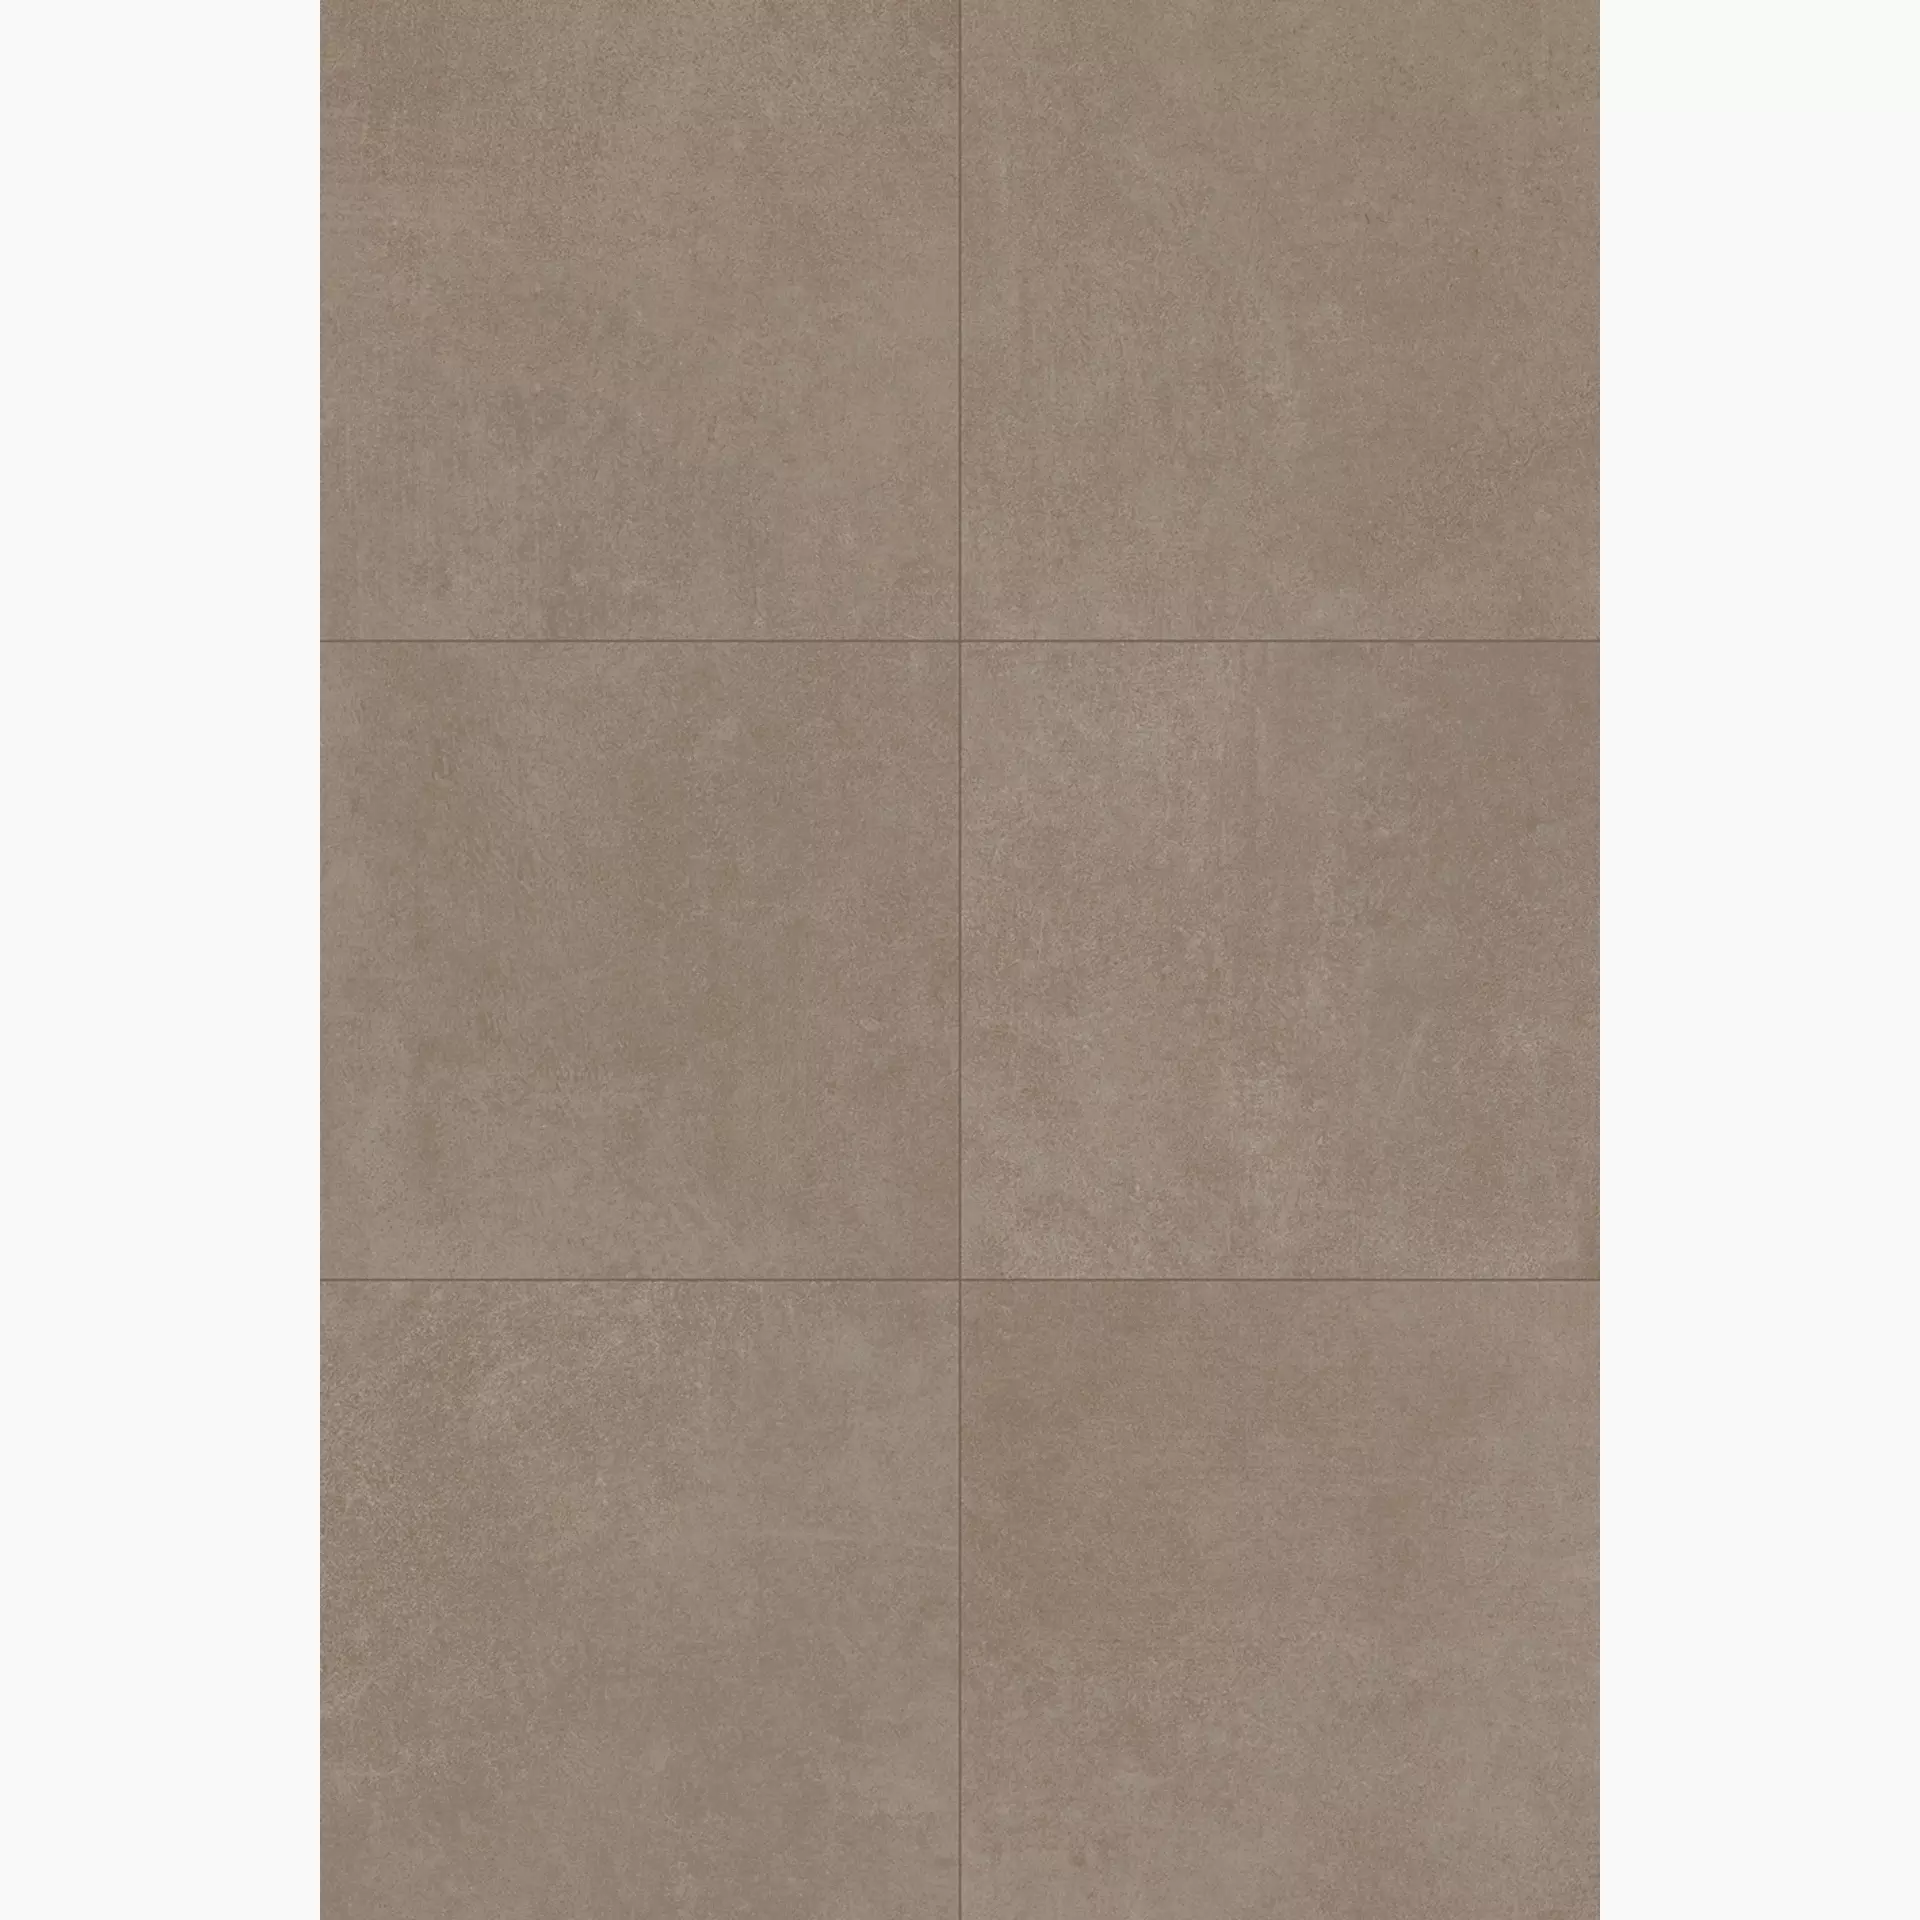 Mirage Glocal Gc 08 Chamois Naturale TN77 60x60cm rectified 9mm